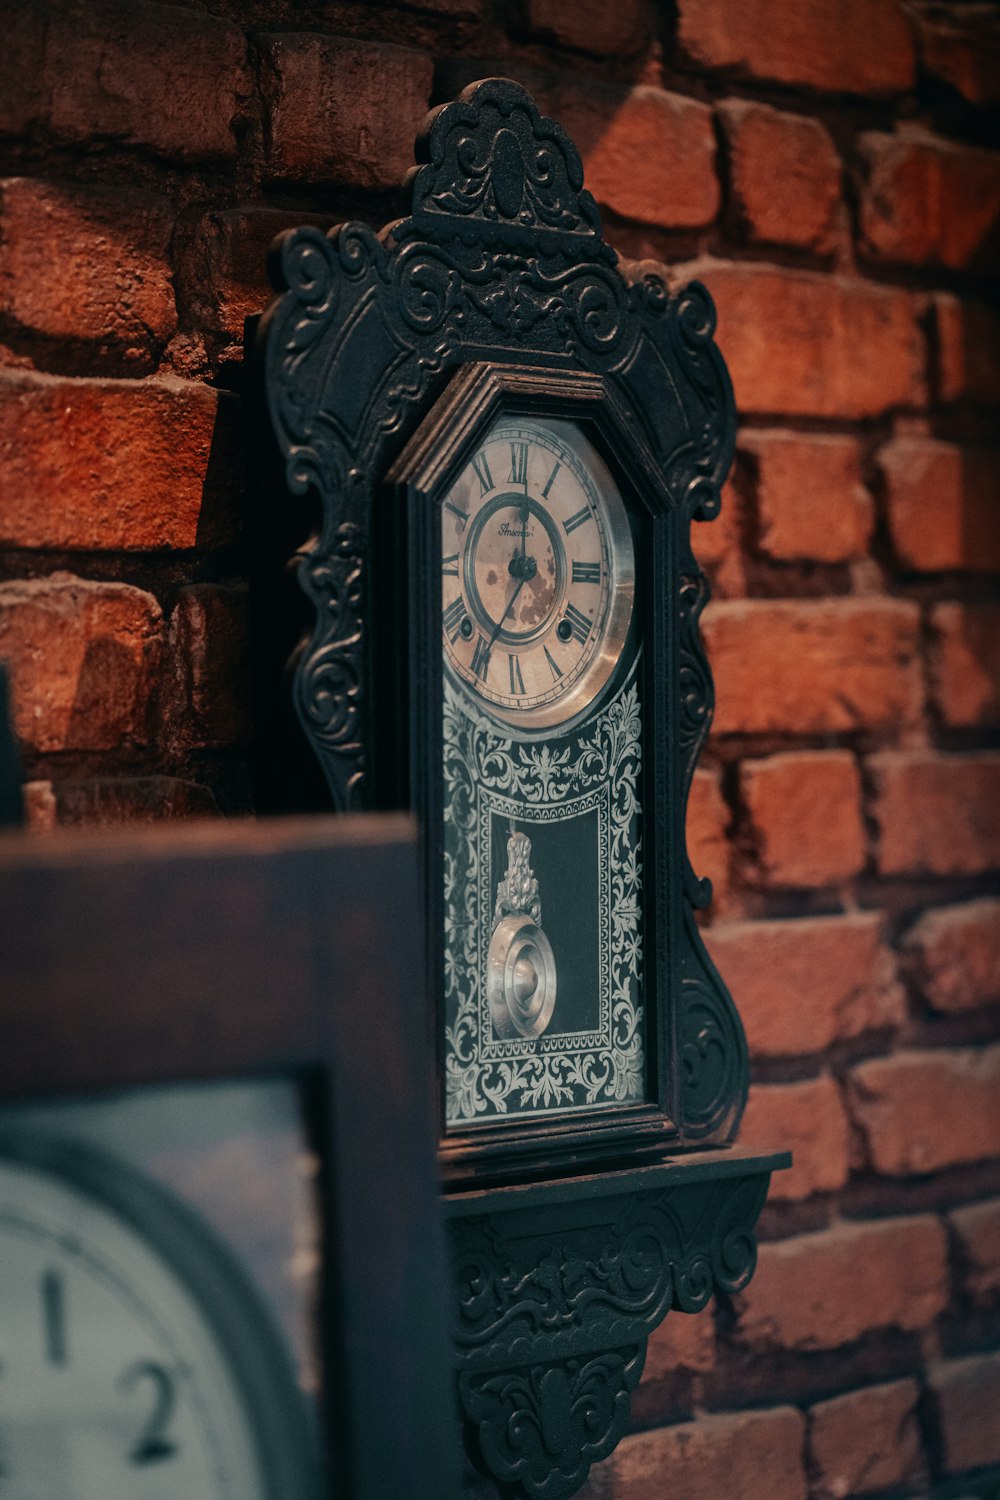 a clock that is on the side of a brick wall